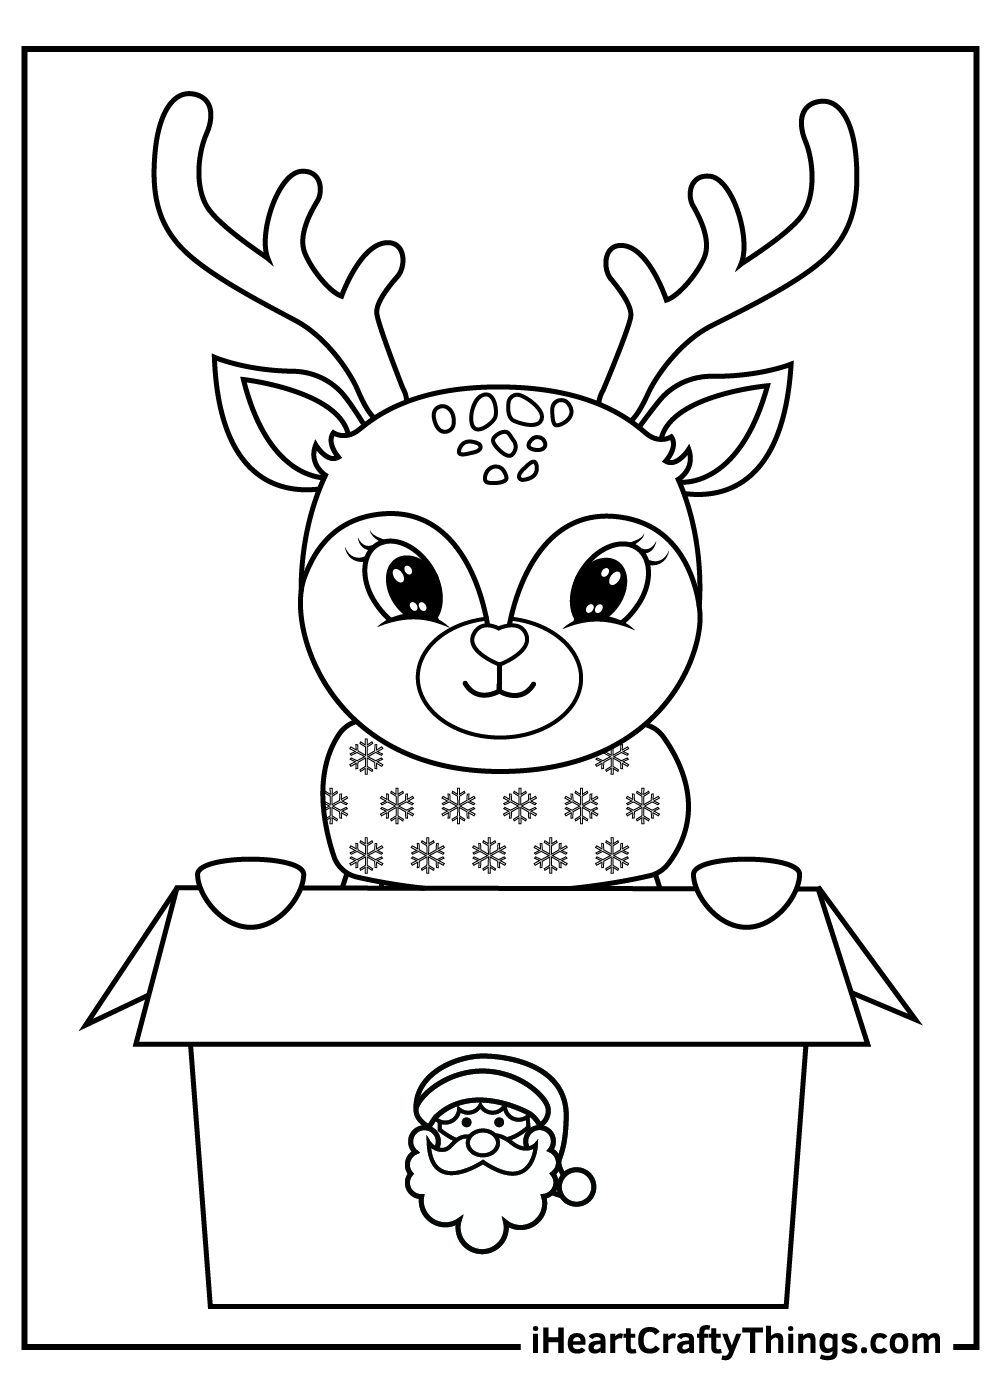 Christmas Reindeers Coloring Pages Updated 20